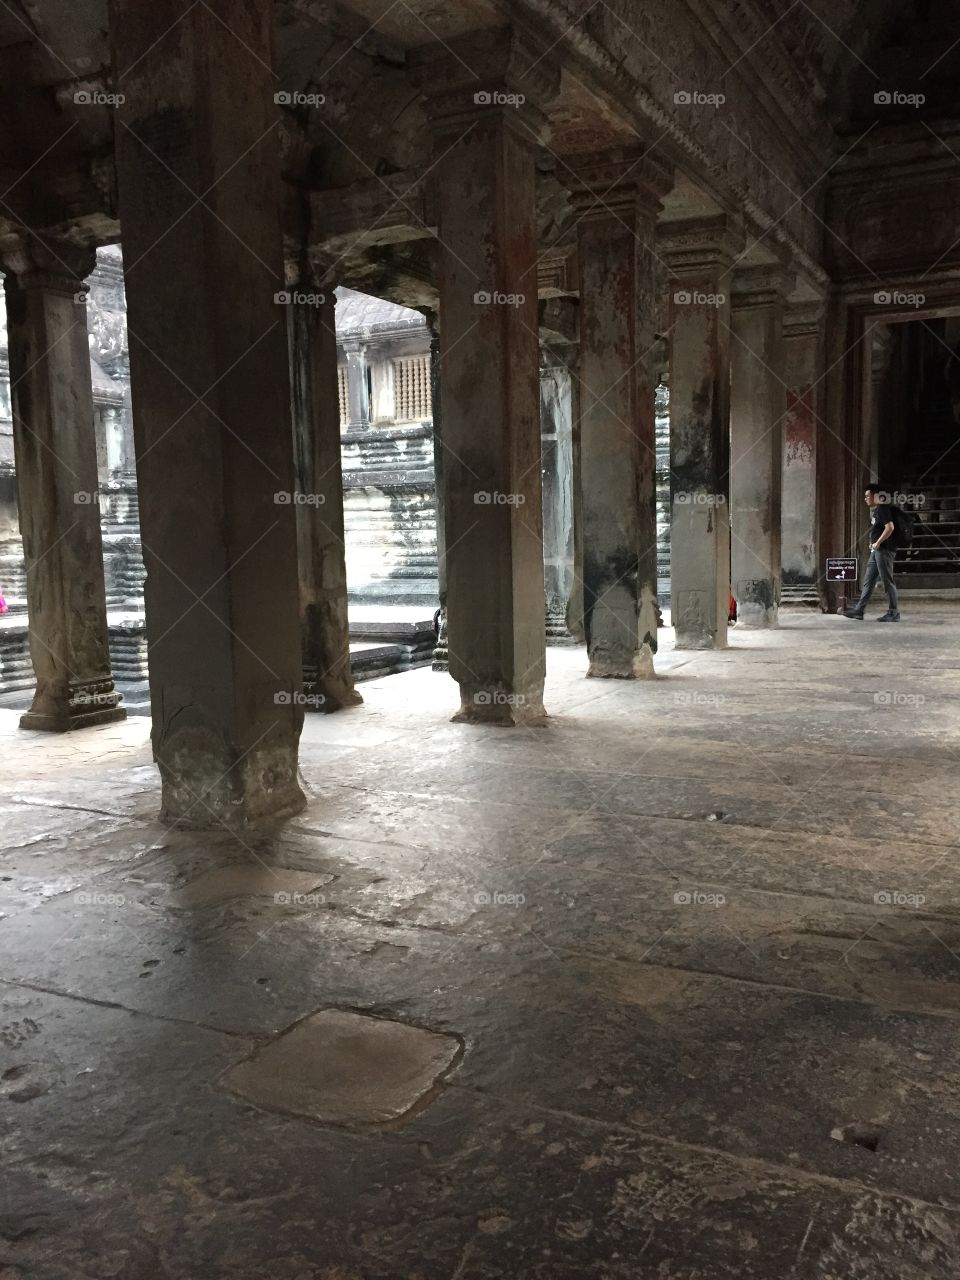 Columns in the ancient Cambodia temple, Angkor Wat. Shows old stone architecture in Asia. 